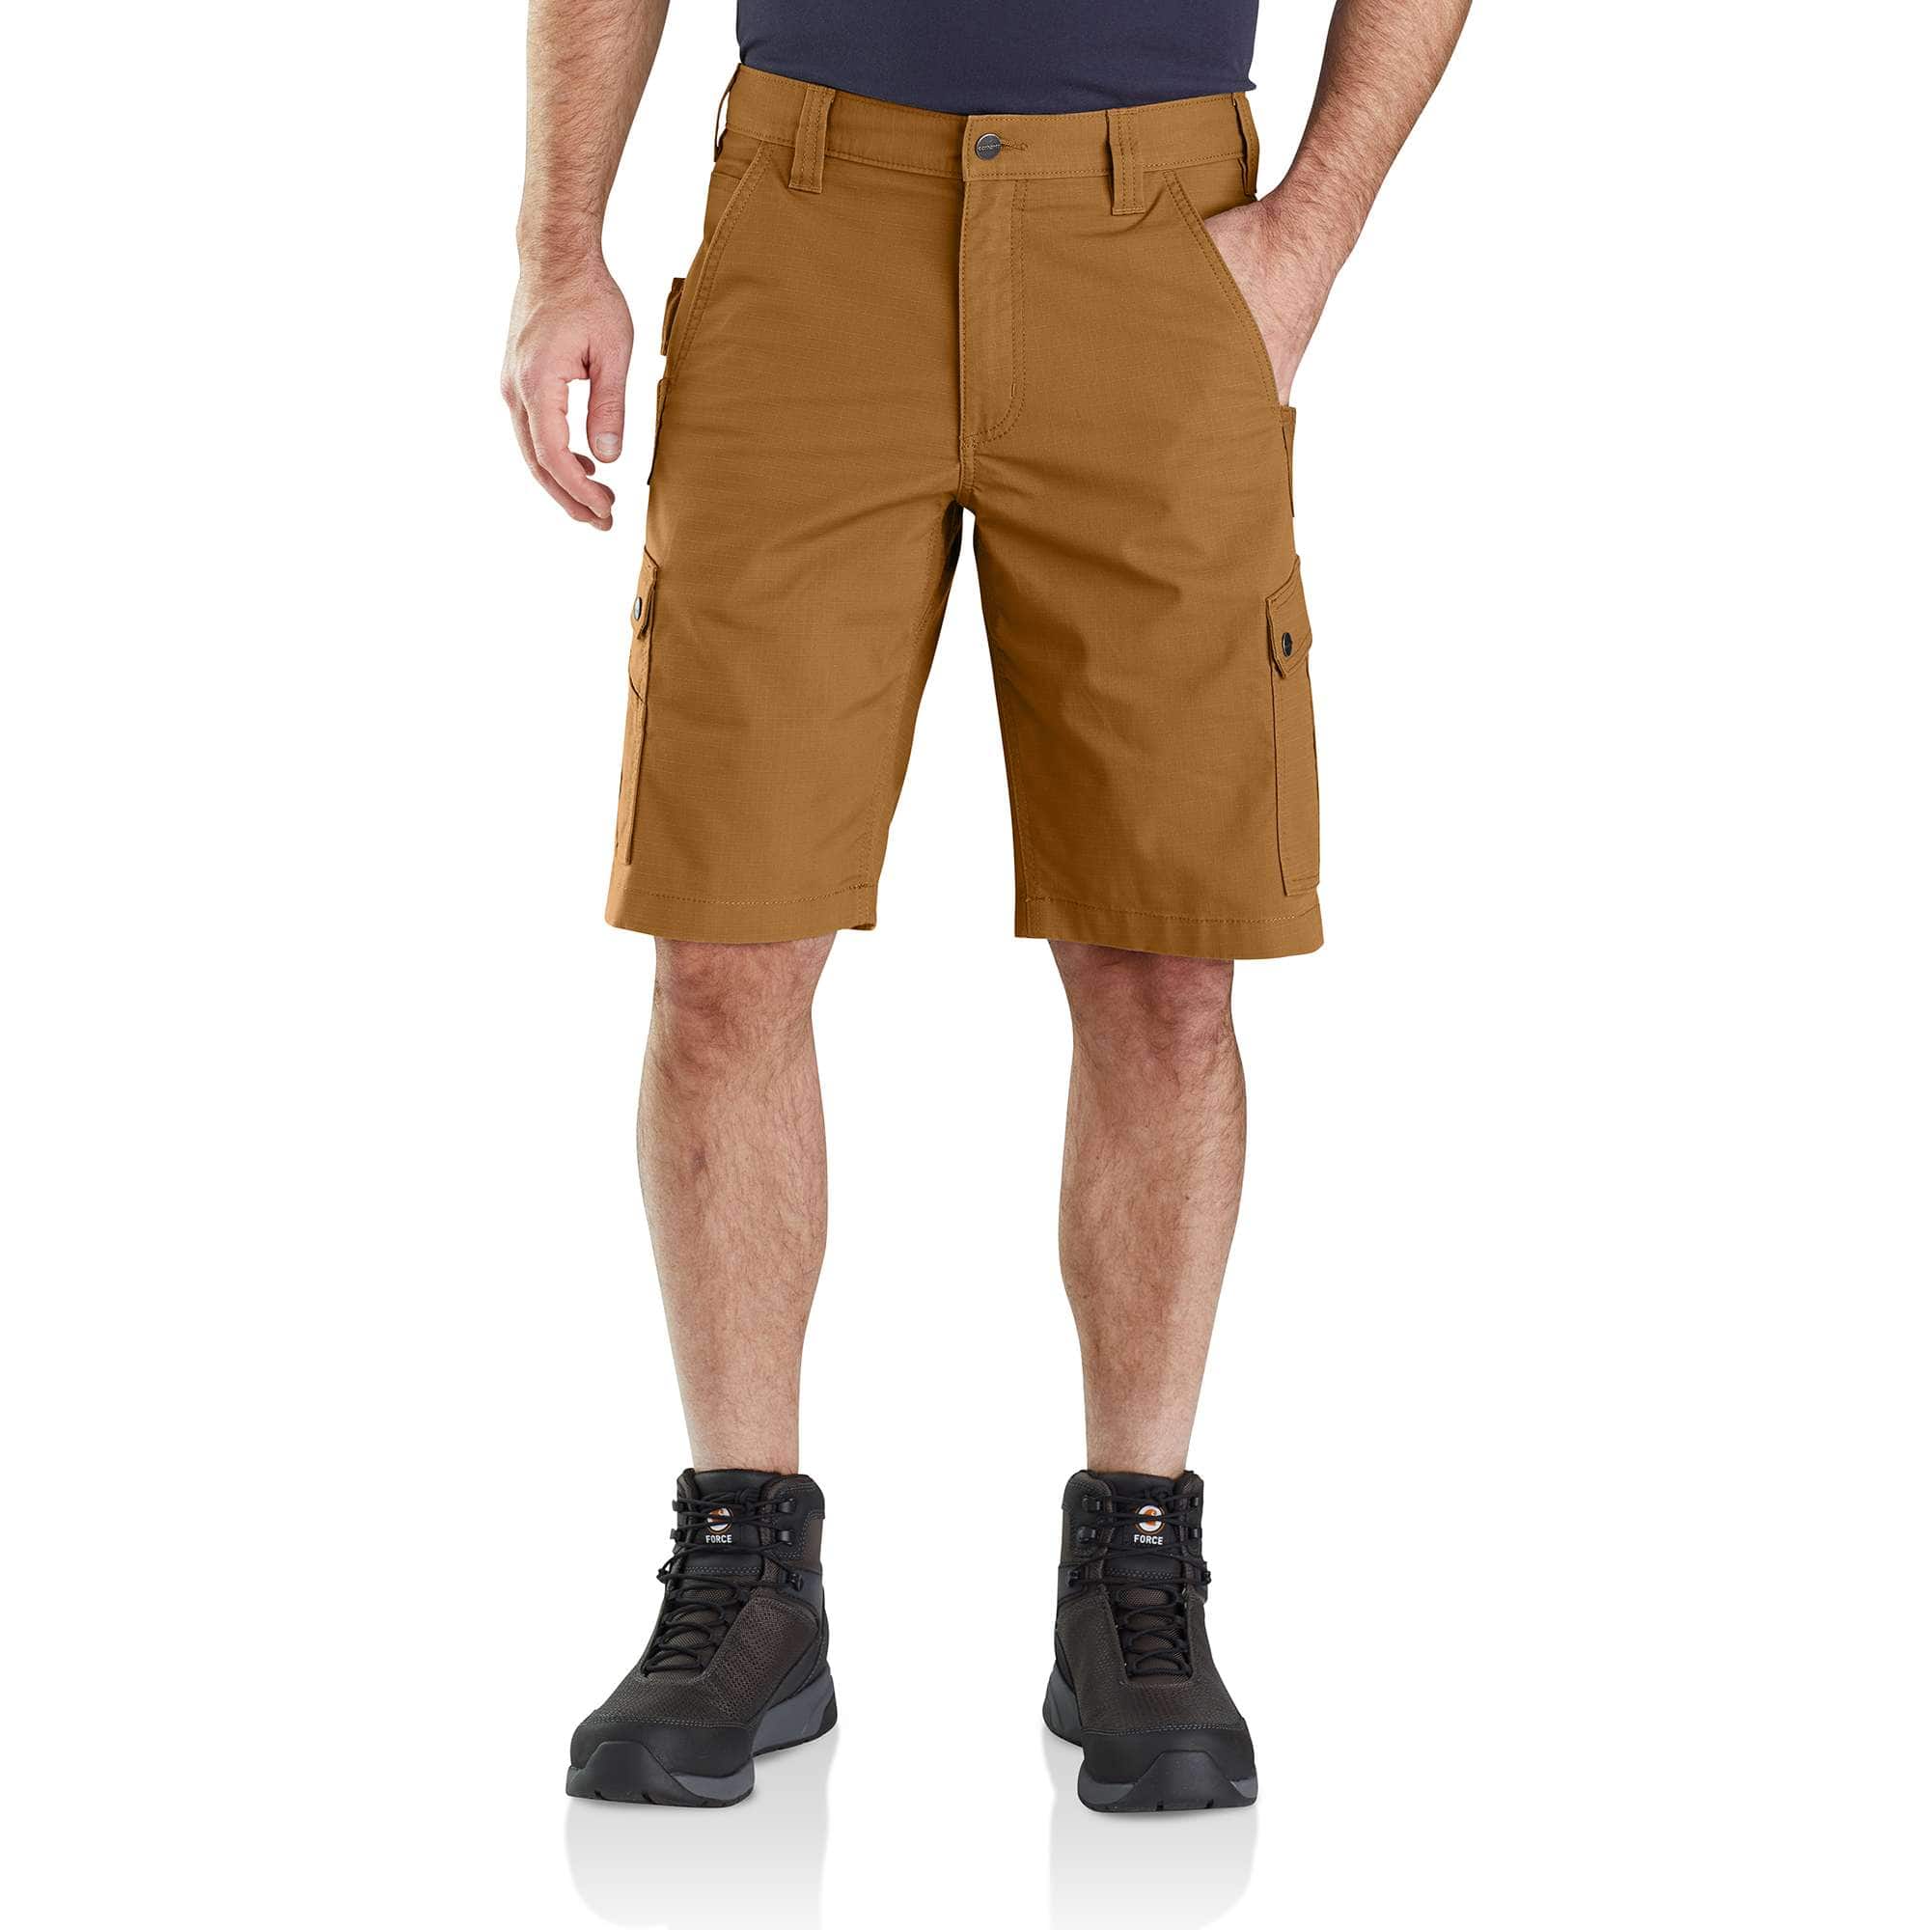 The Carhartt shorts and leggings all women need this summer